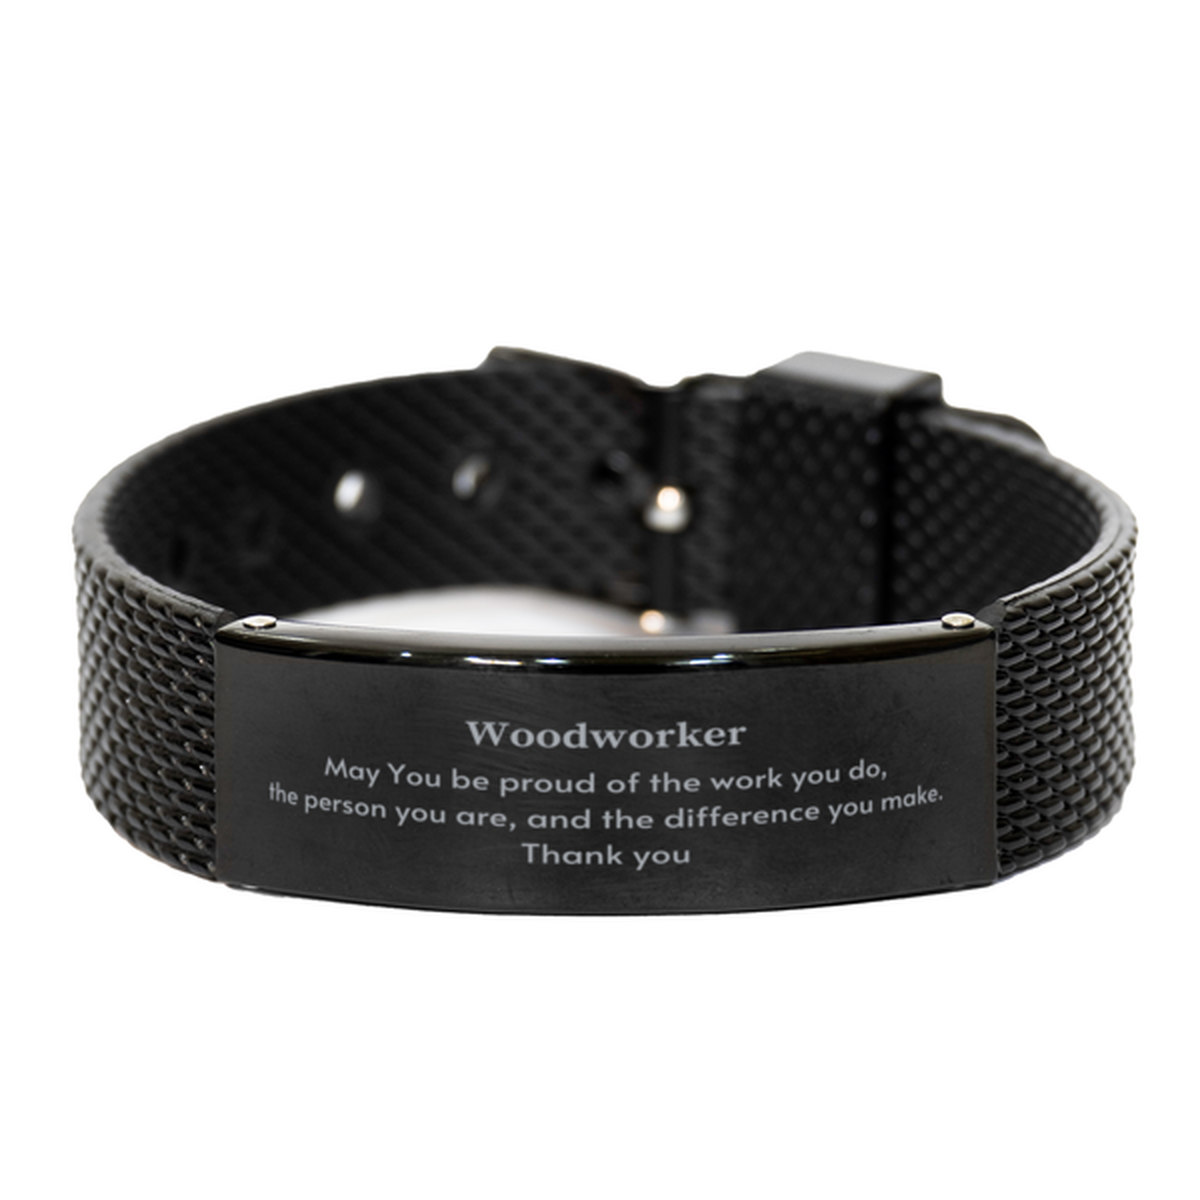 Heartwarming Black Shark Mesh Bracelet Retirement Coworkers Gifts for Woodworker, Woodworker May You be proud of the work you do, the person you are Gifts for Boss Men Women Friends